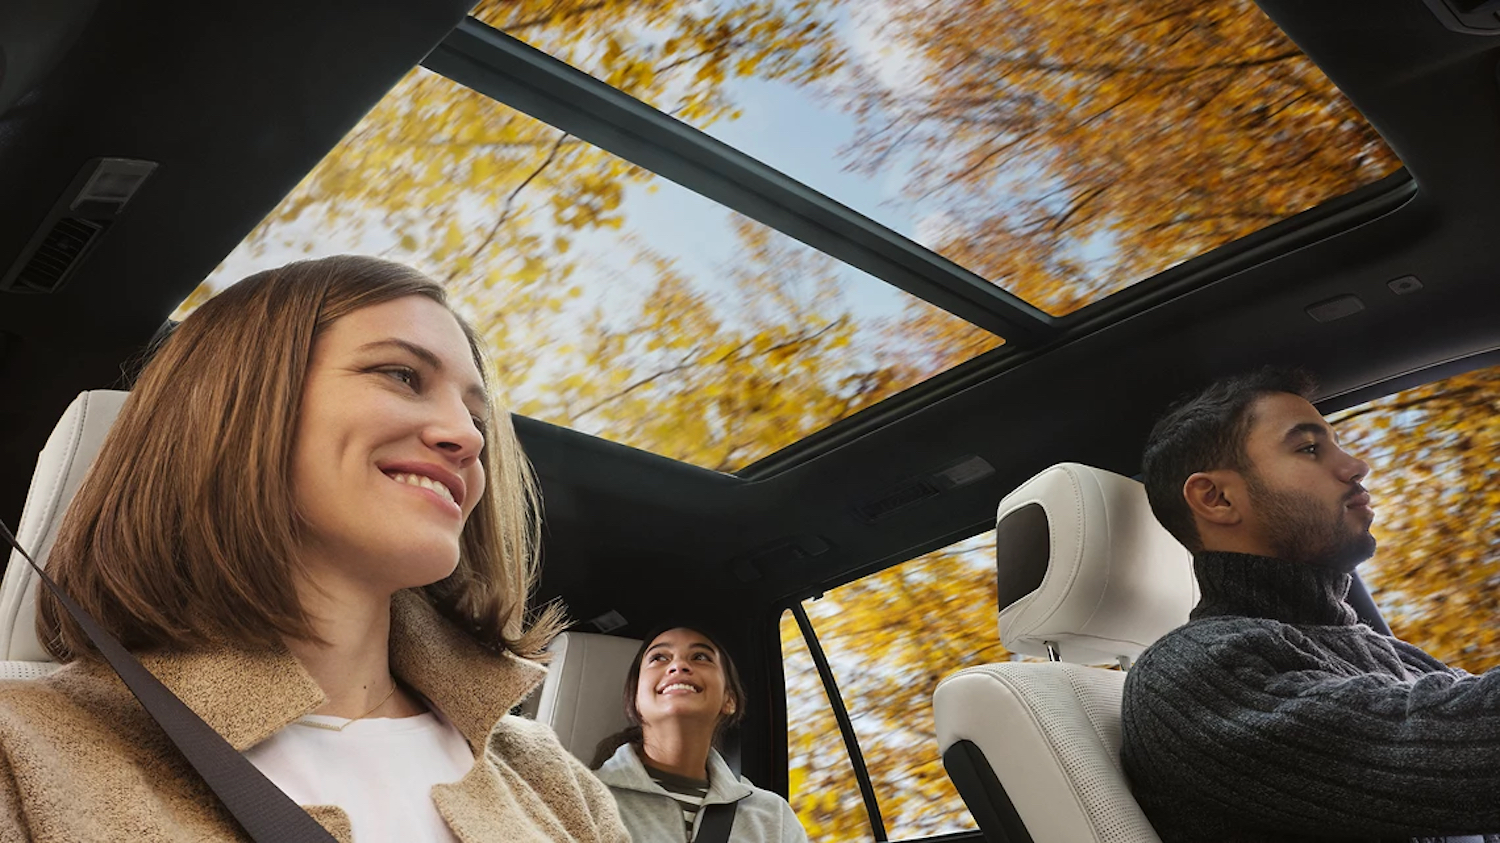 A family driving through the country in their Toyota Sequoia SUV, fall foliage visible through the sunroof.